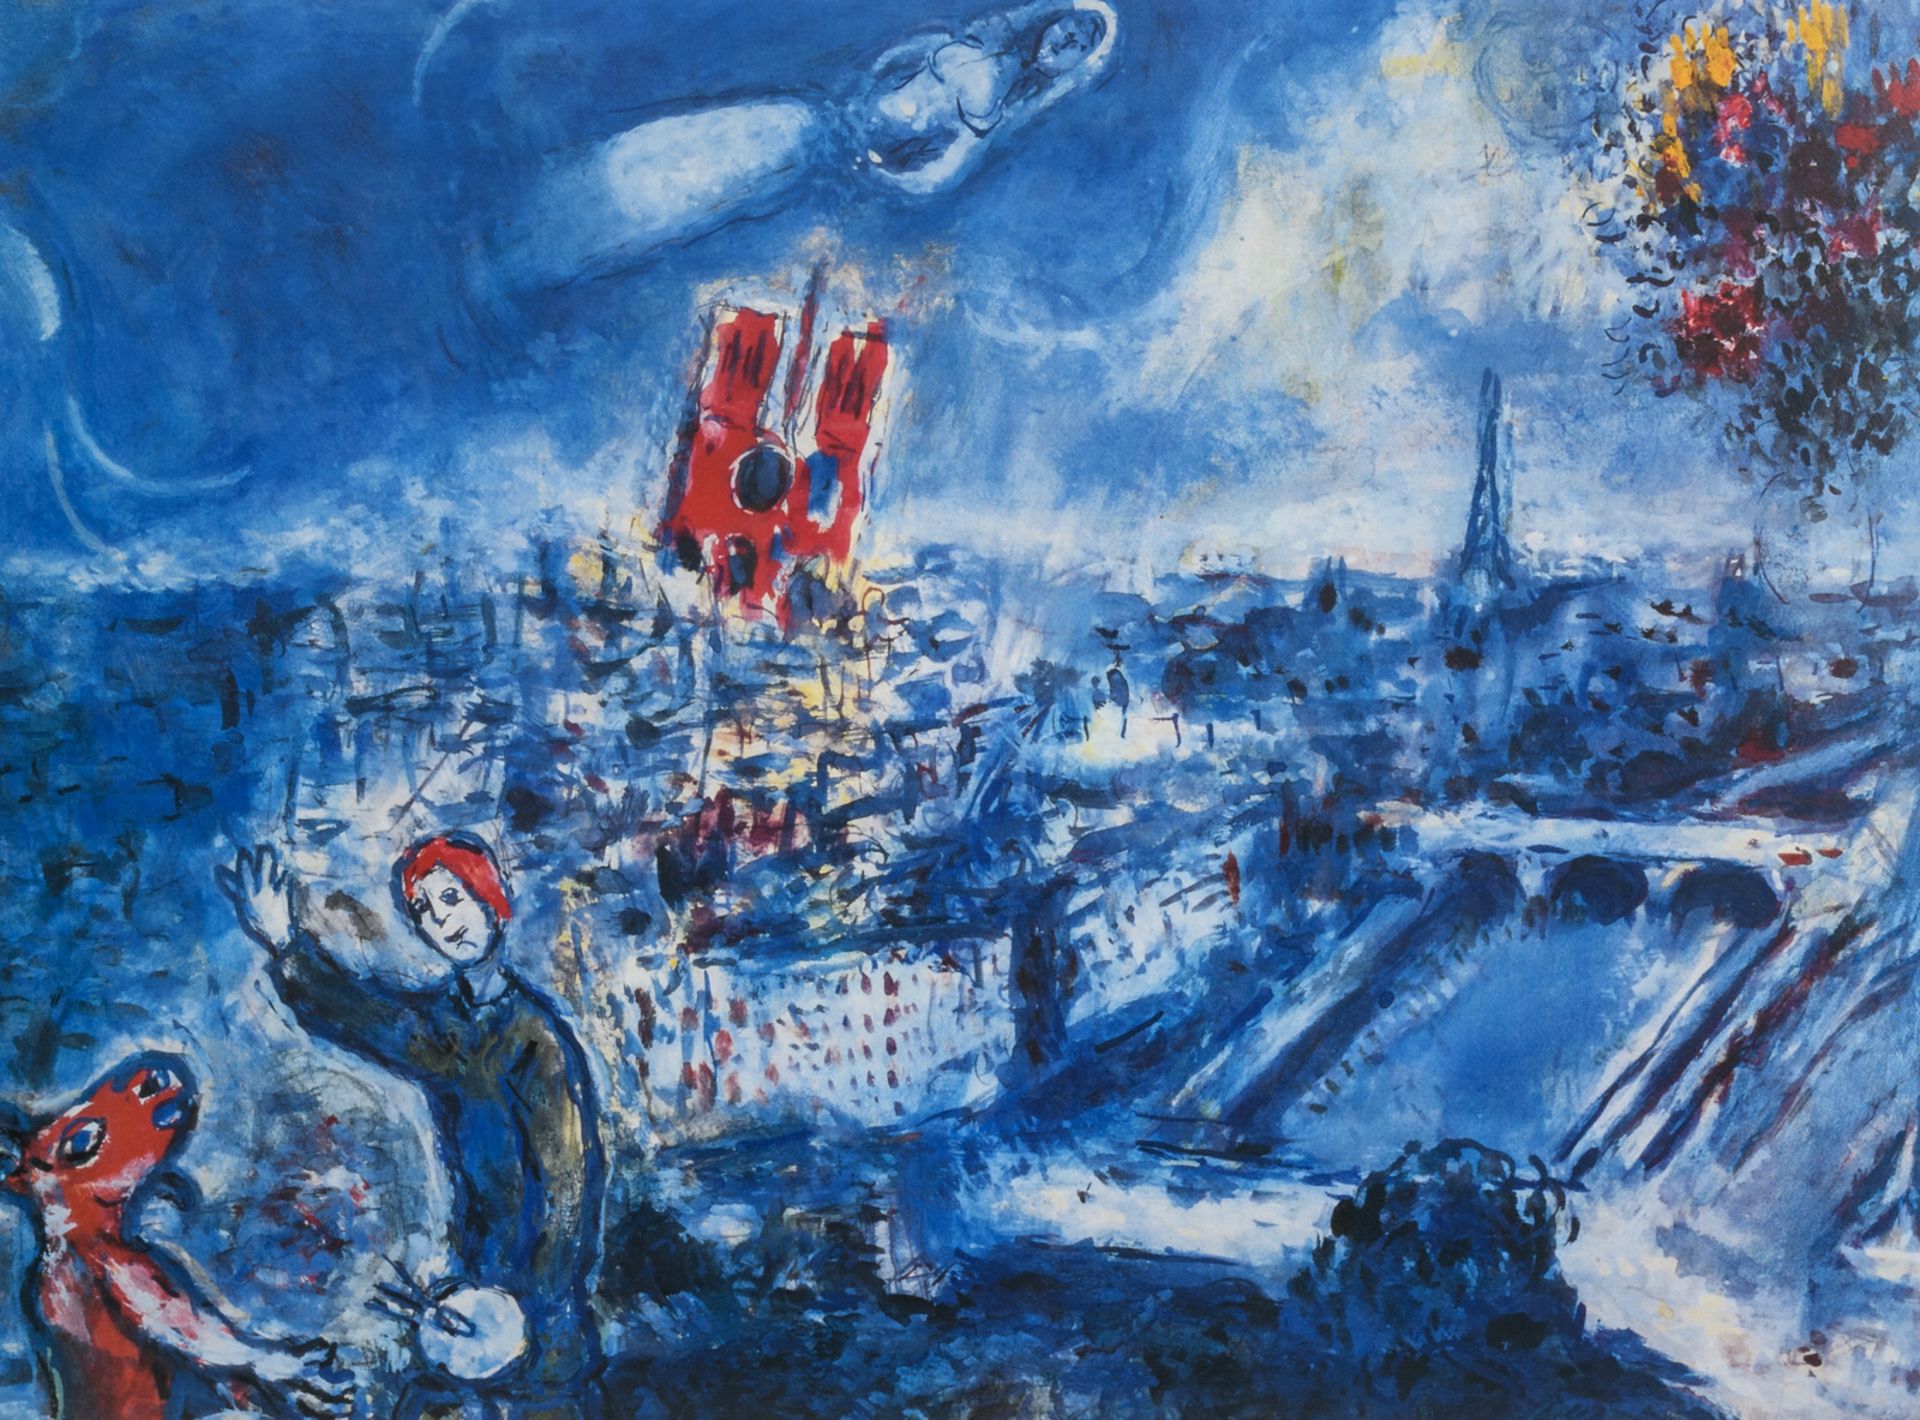 Chagall M., 'A view on Paris', industrial lithograph, no. I 197/500, 67 x 86 cm